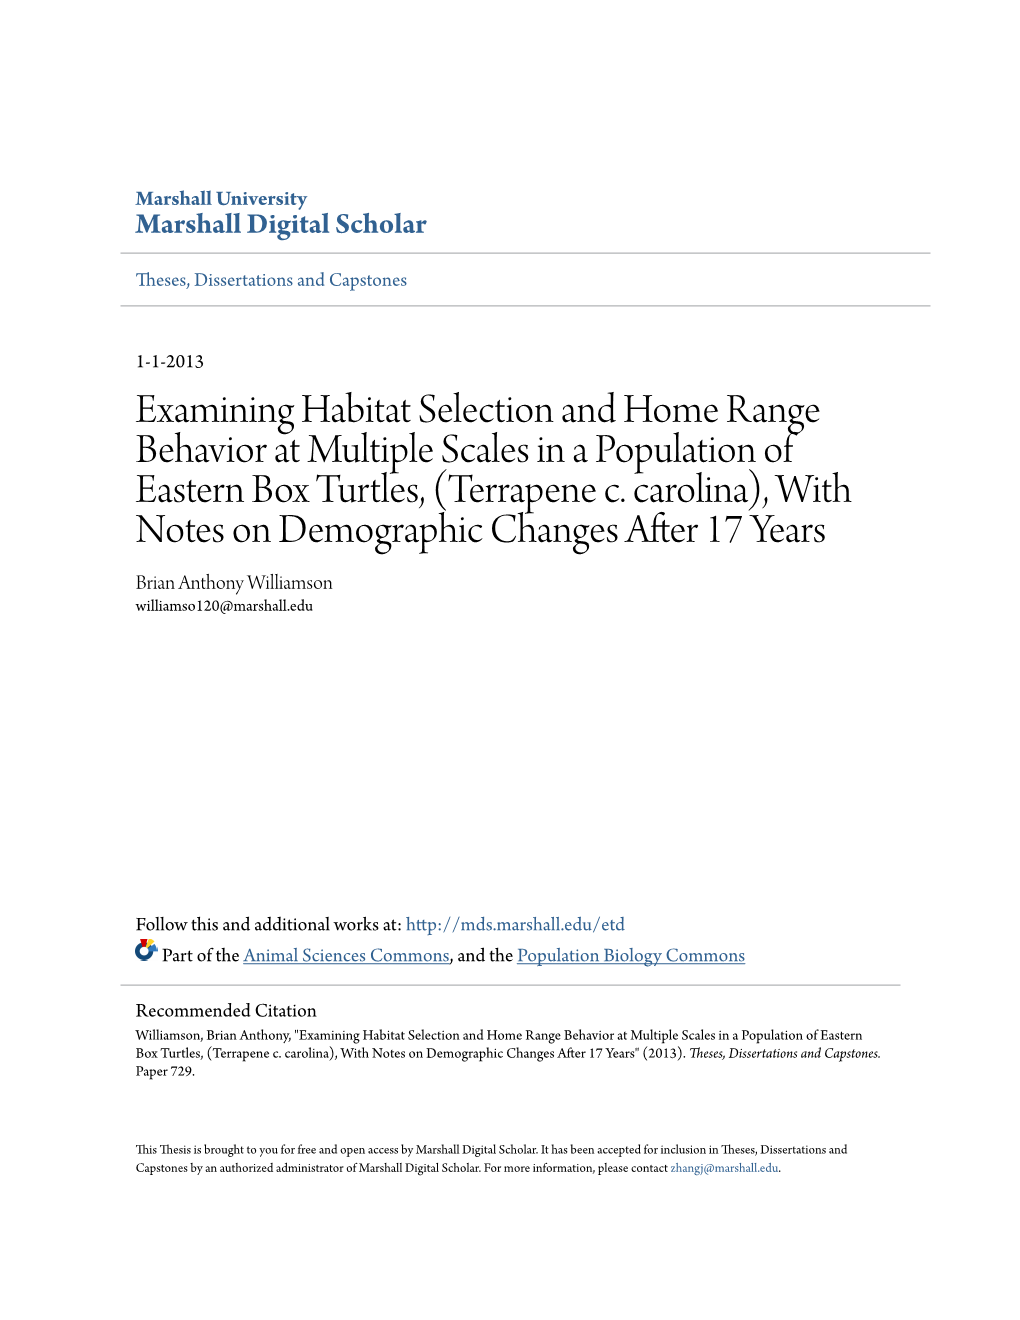 Examining Habitat Selection and Home Range Behavior at Multiple Scales in a Population of Eastern Box Turtles, (Terrapene C